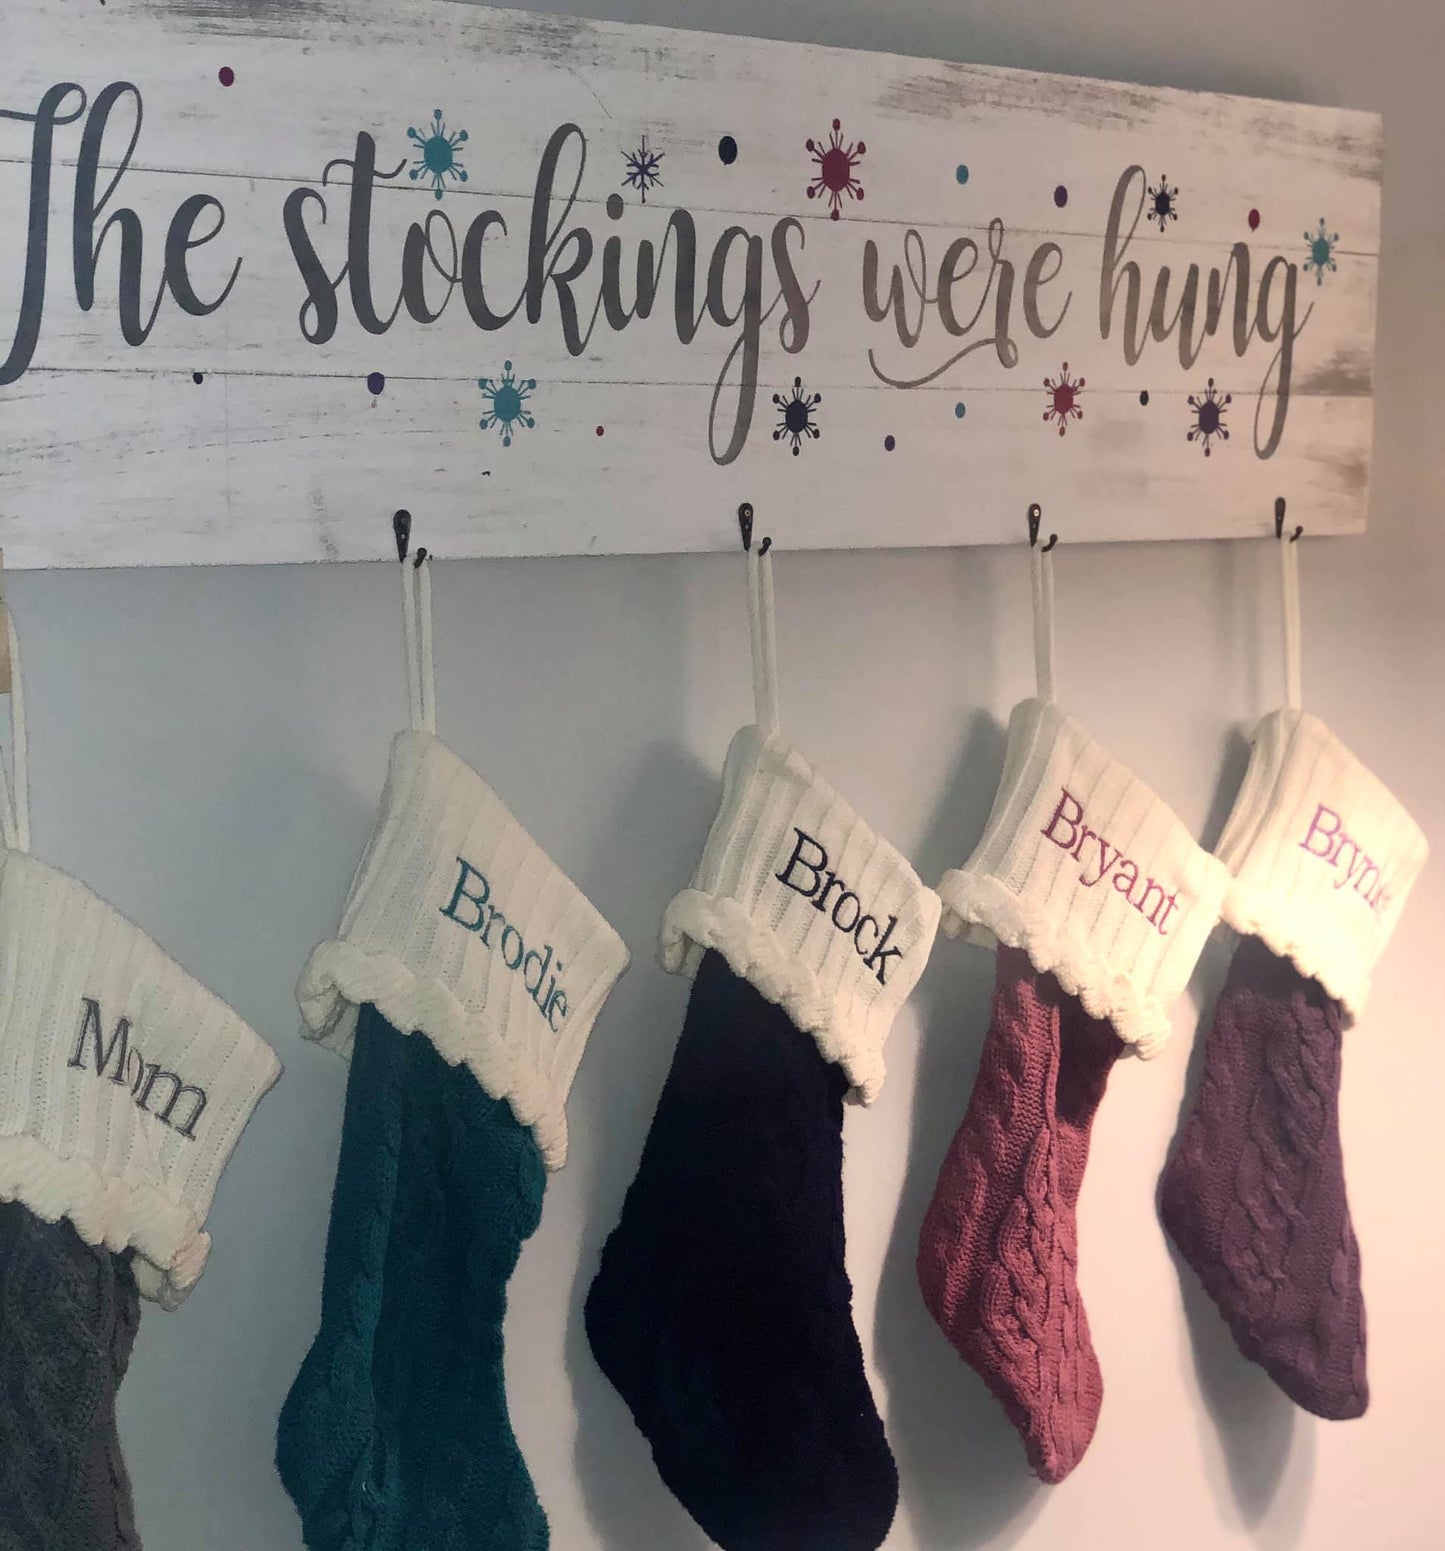 The Stockings were hung (up to 4 hooks included): Plank Design - Paisley Grace Makery